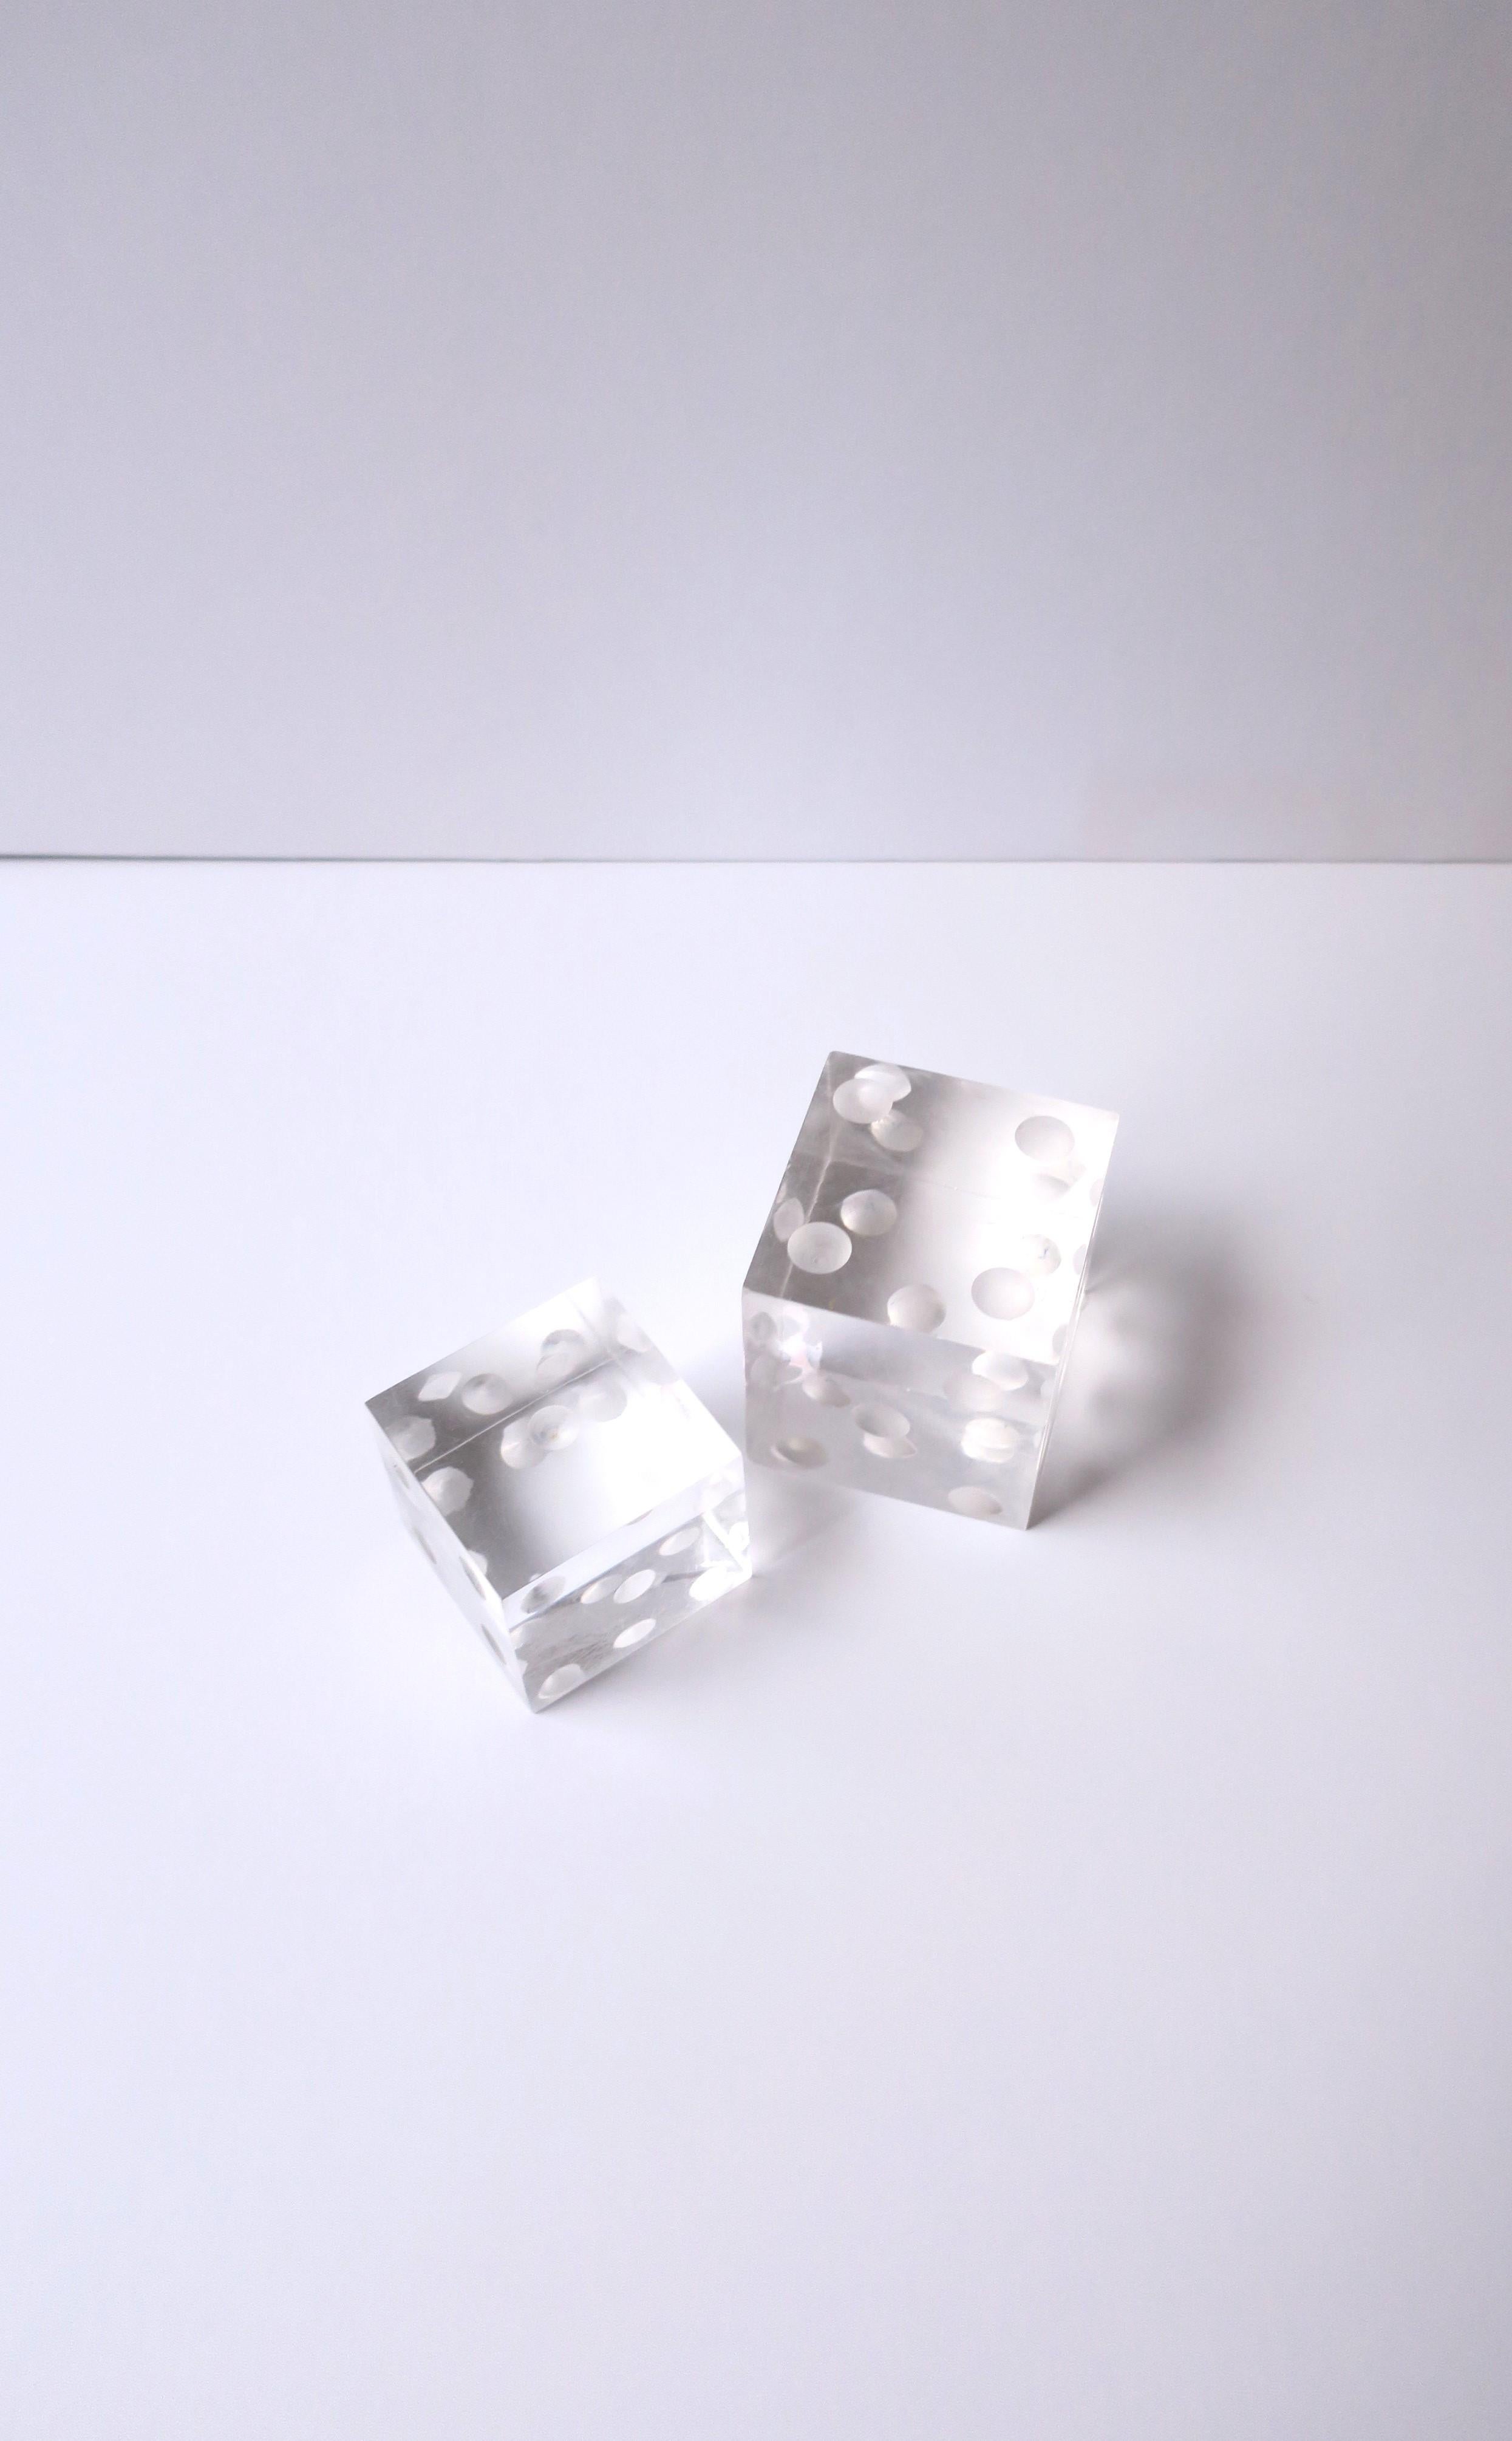 A pair/set of Lucite dice decorative objects, in the Modern style, circa late-20th century. A great set for a desk, bookshelf, coffee/cocktail table, etc. 

Dimensions:
2.44